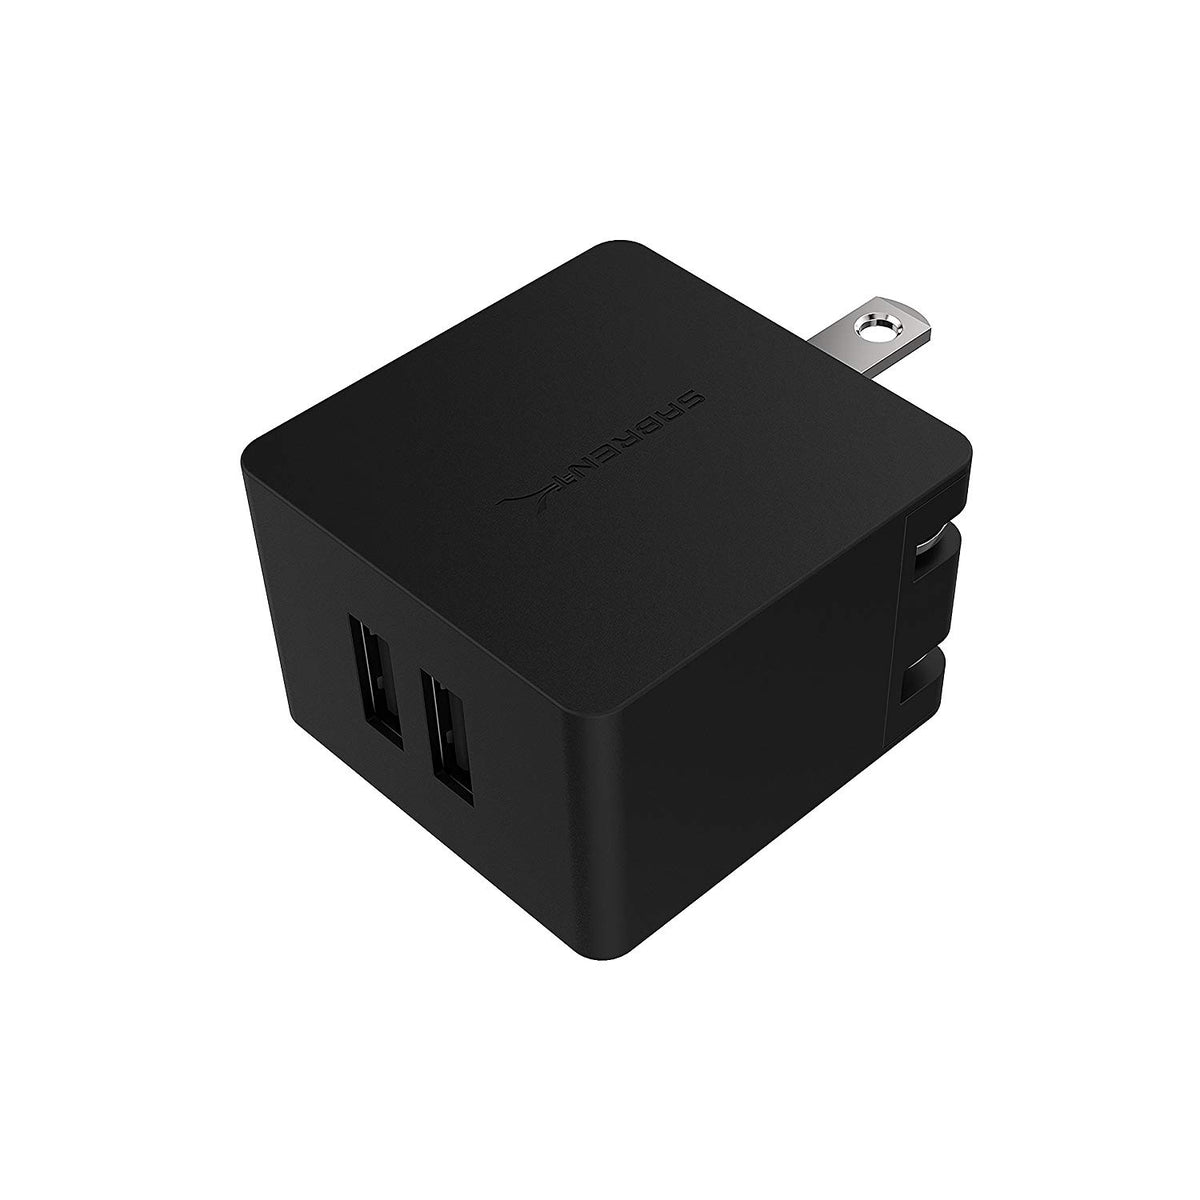 [UL Certified] Dual USB Wall Charger with Foldable Plug (10.5W 2.1 Amp) Smart USB Charger with Auto Detect Technology [Black]